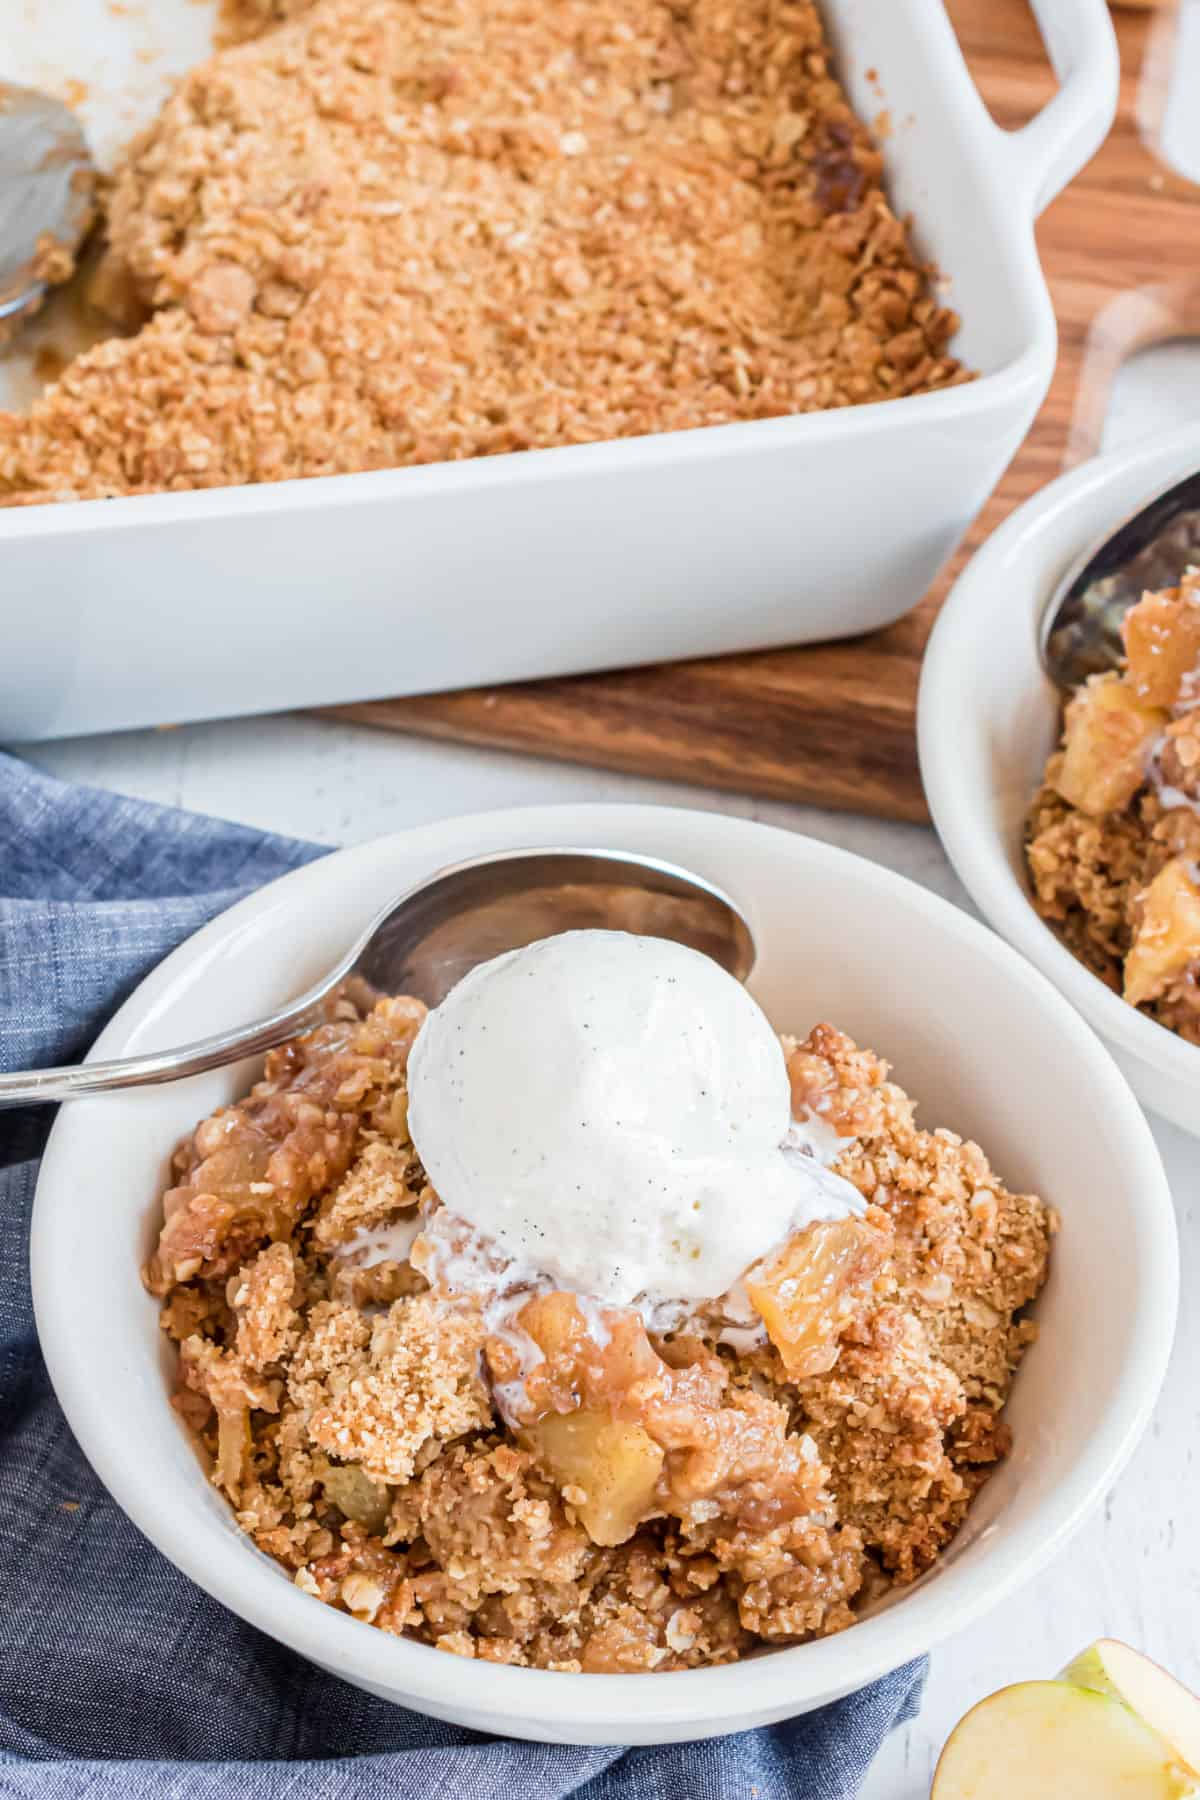 Apple crumble scooped into a white bowl and topped with vanilla ice cream.